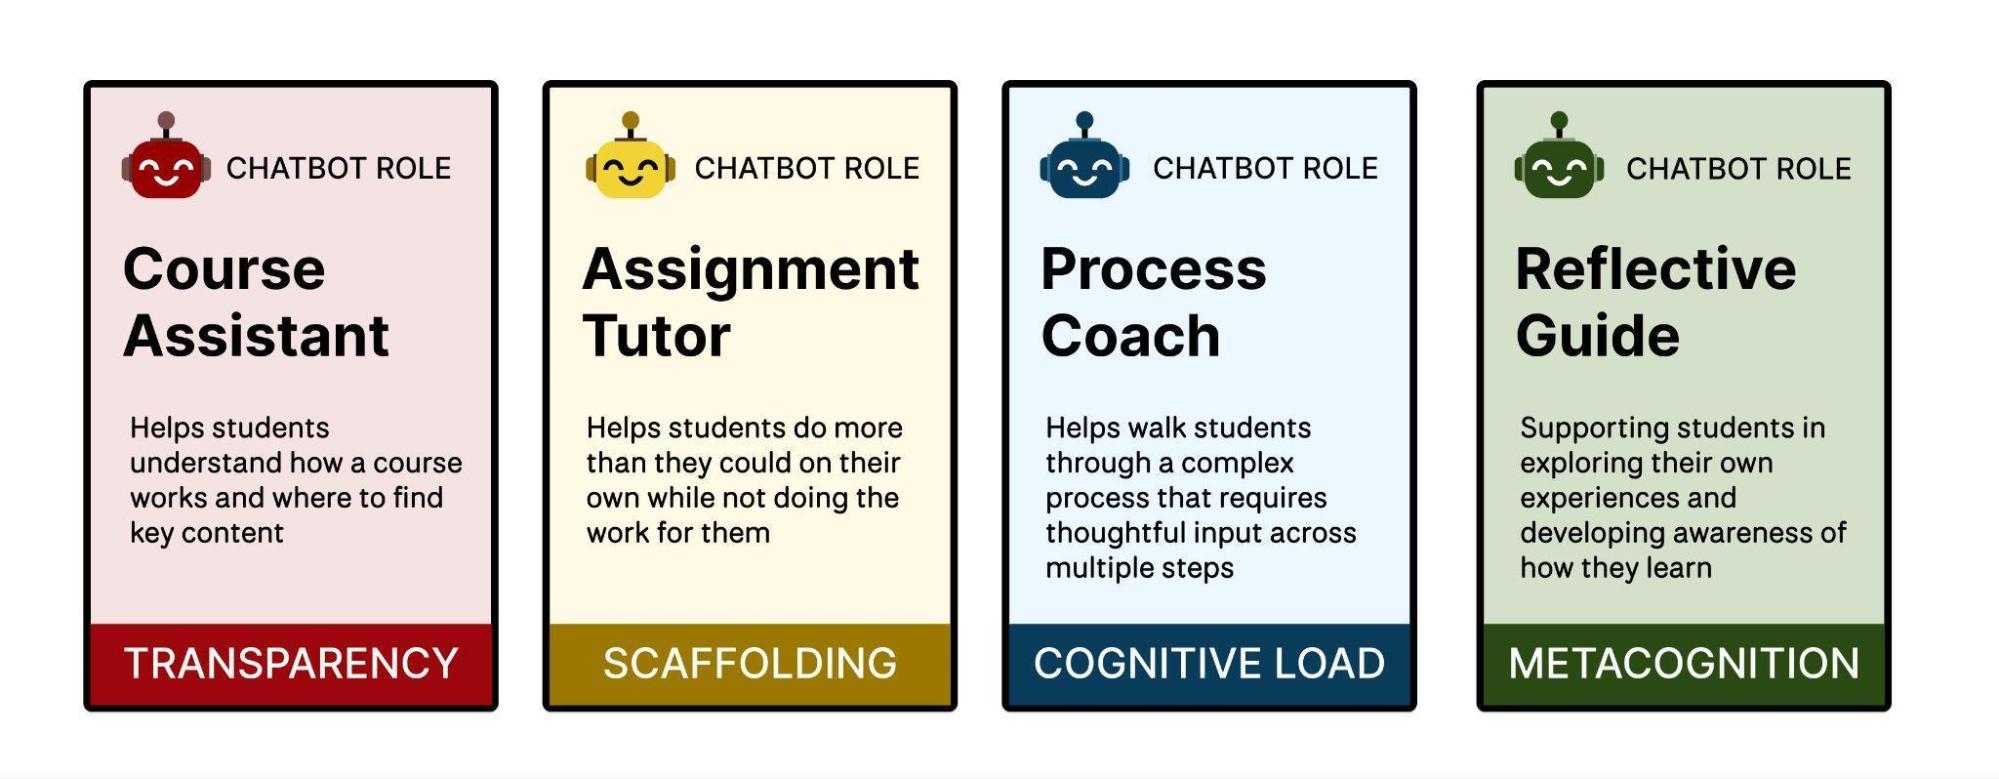 Four colorful cards describing chatbot roles in education: Course Assistant for transparency, Assignment Tutor for scaffolding, Process Coach for cognitive load management, and Reflective Guide for metacognition.